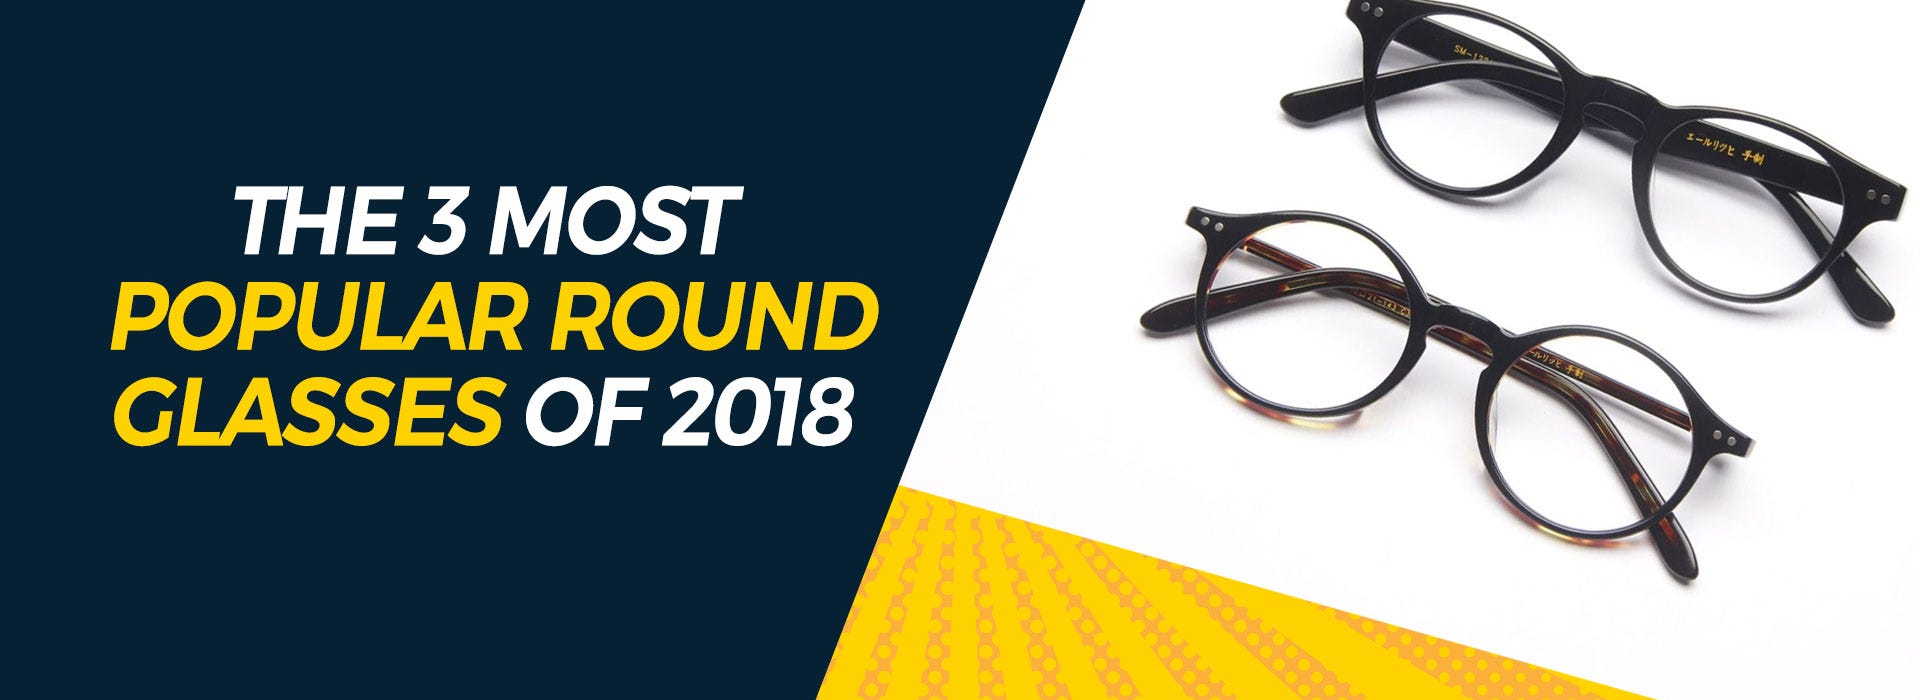 The 3 Most Popular Round Glasses of 2018